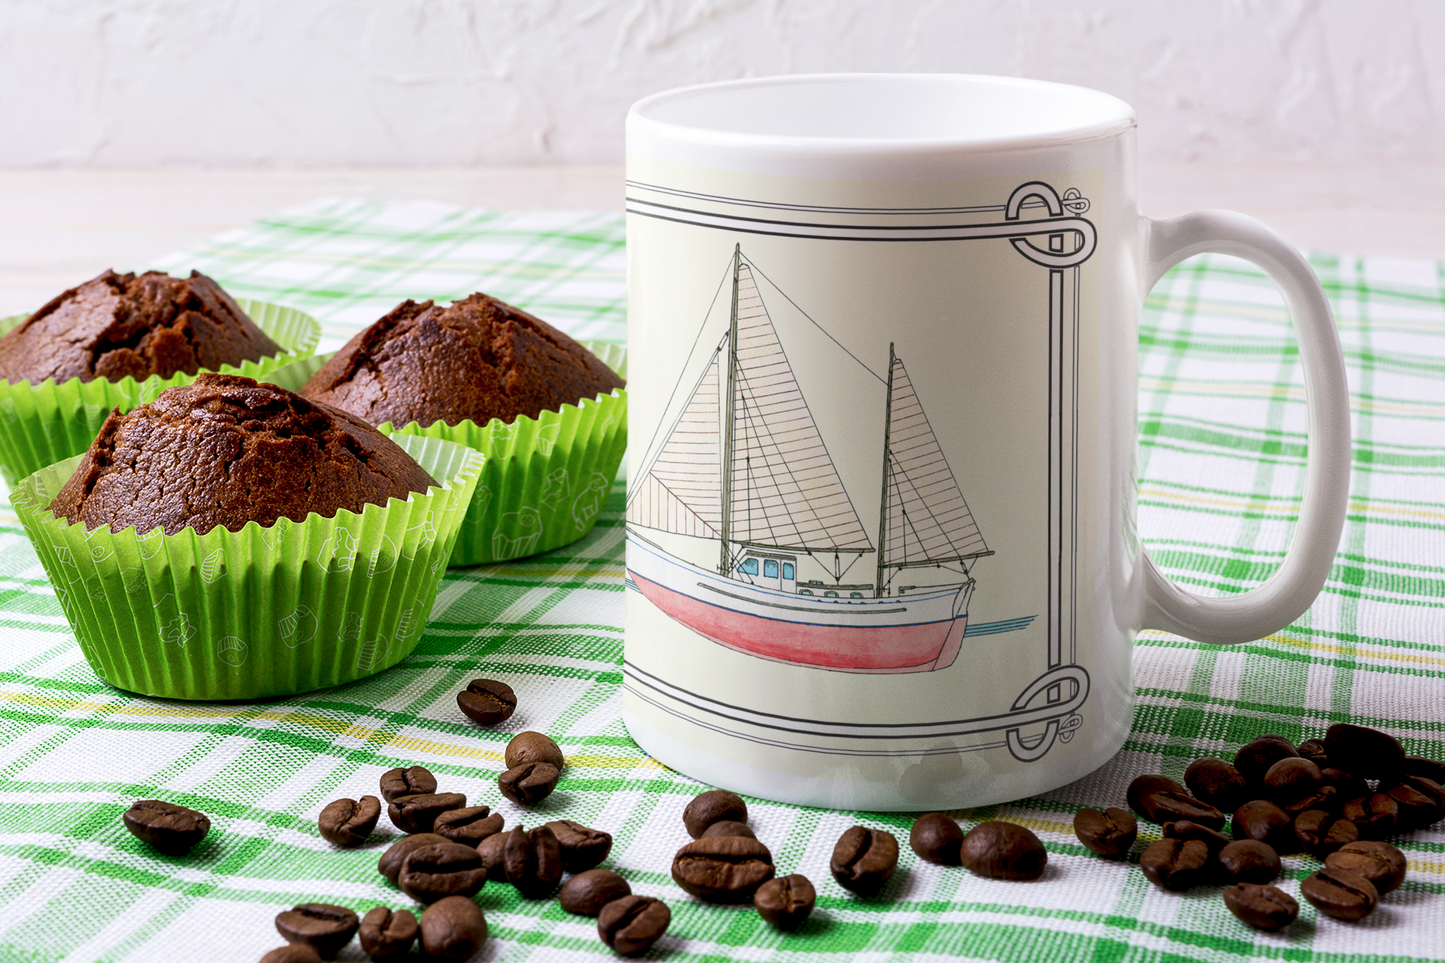 Enjoy a cup of your favorite beverage in our Aurora 11 oz. mug.